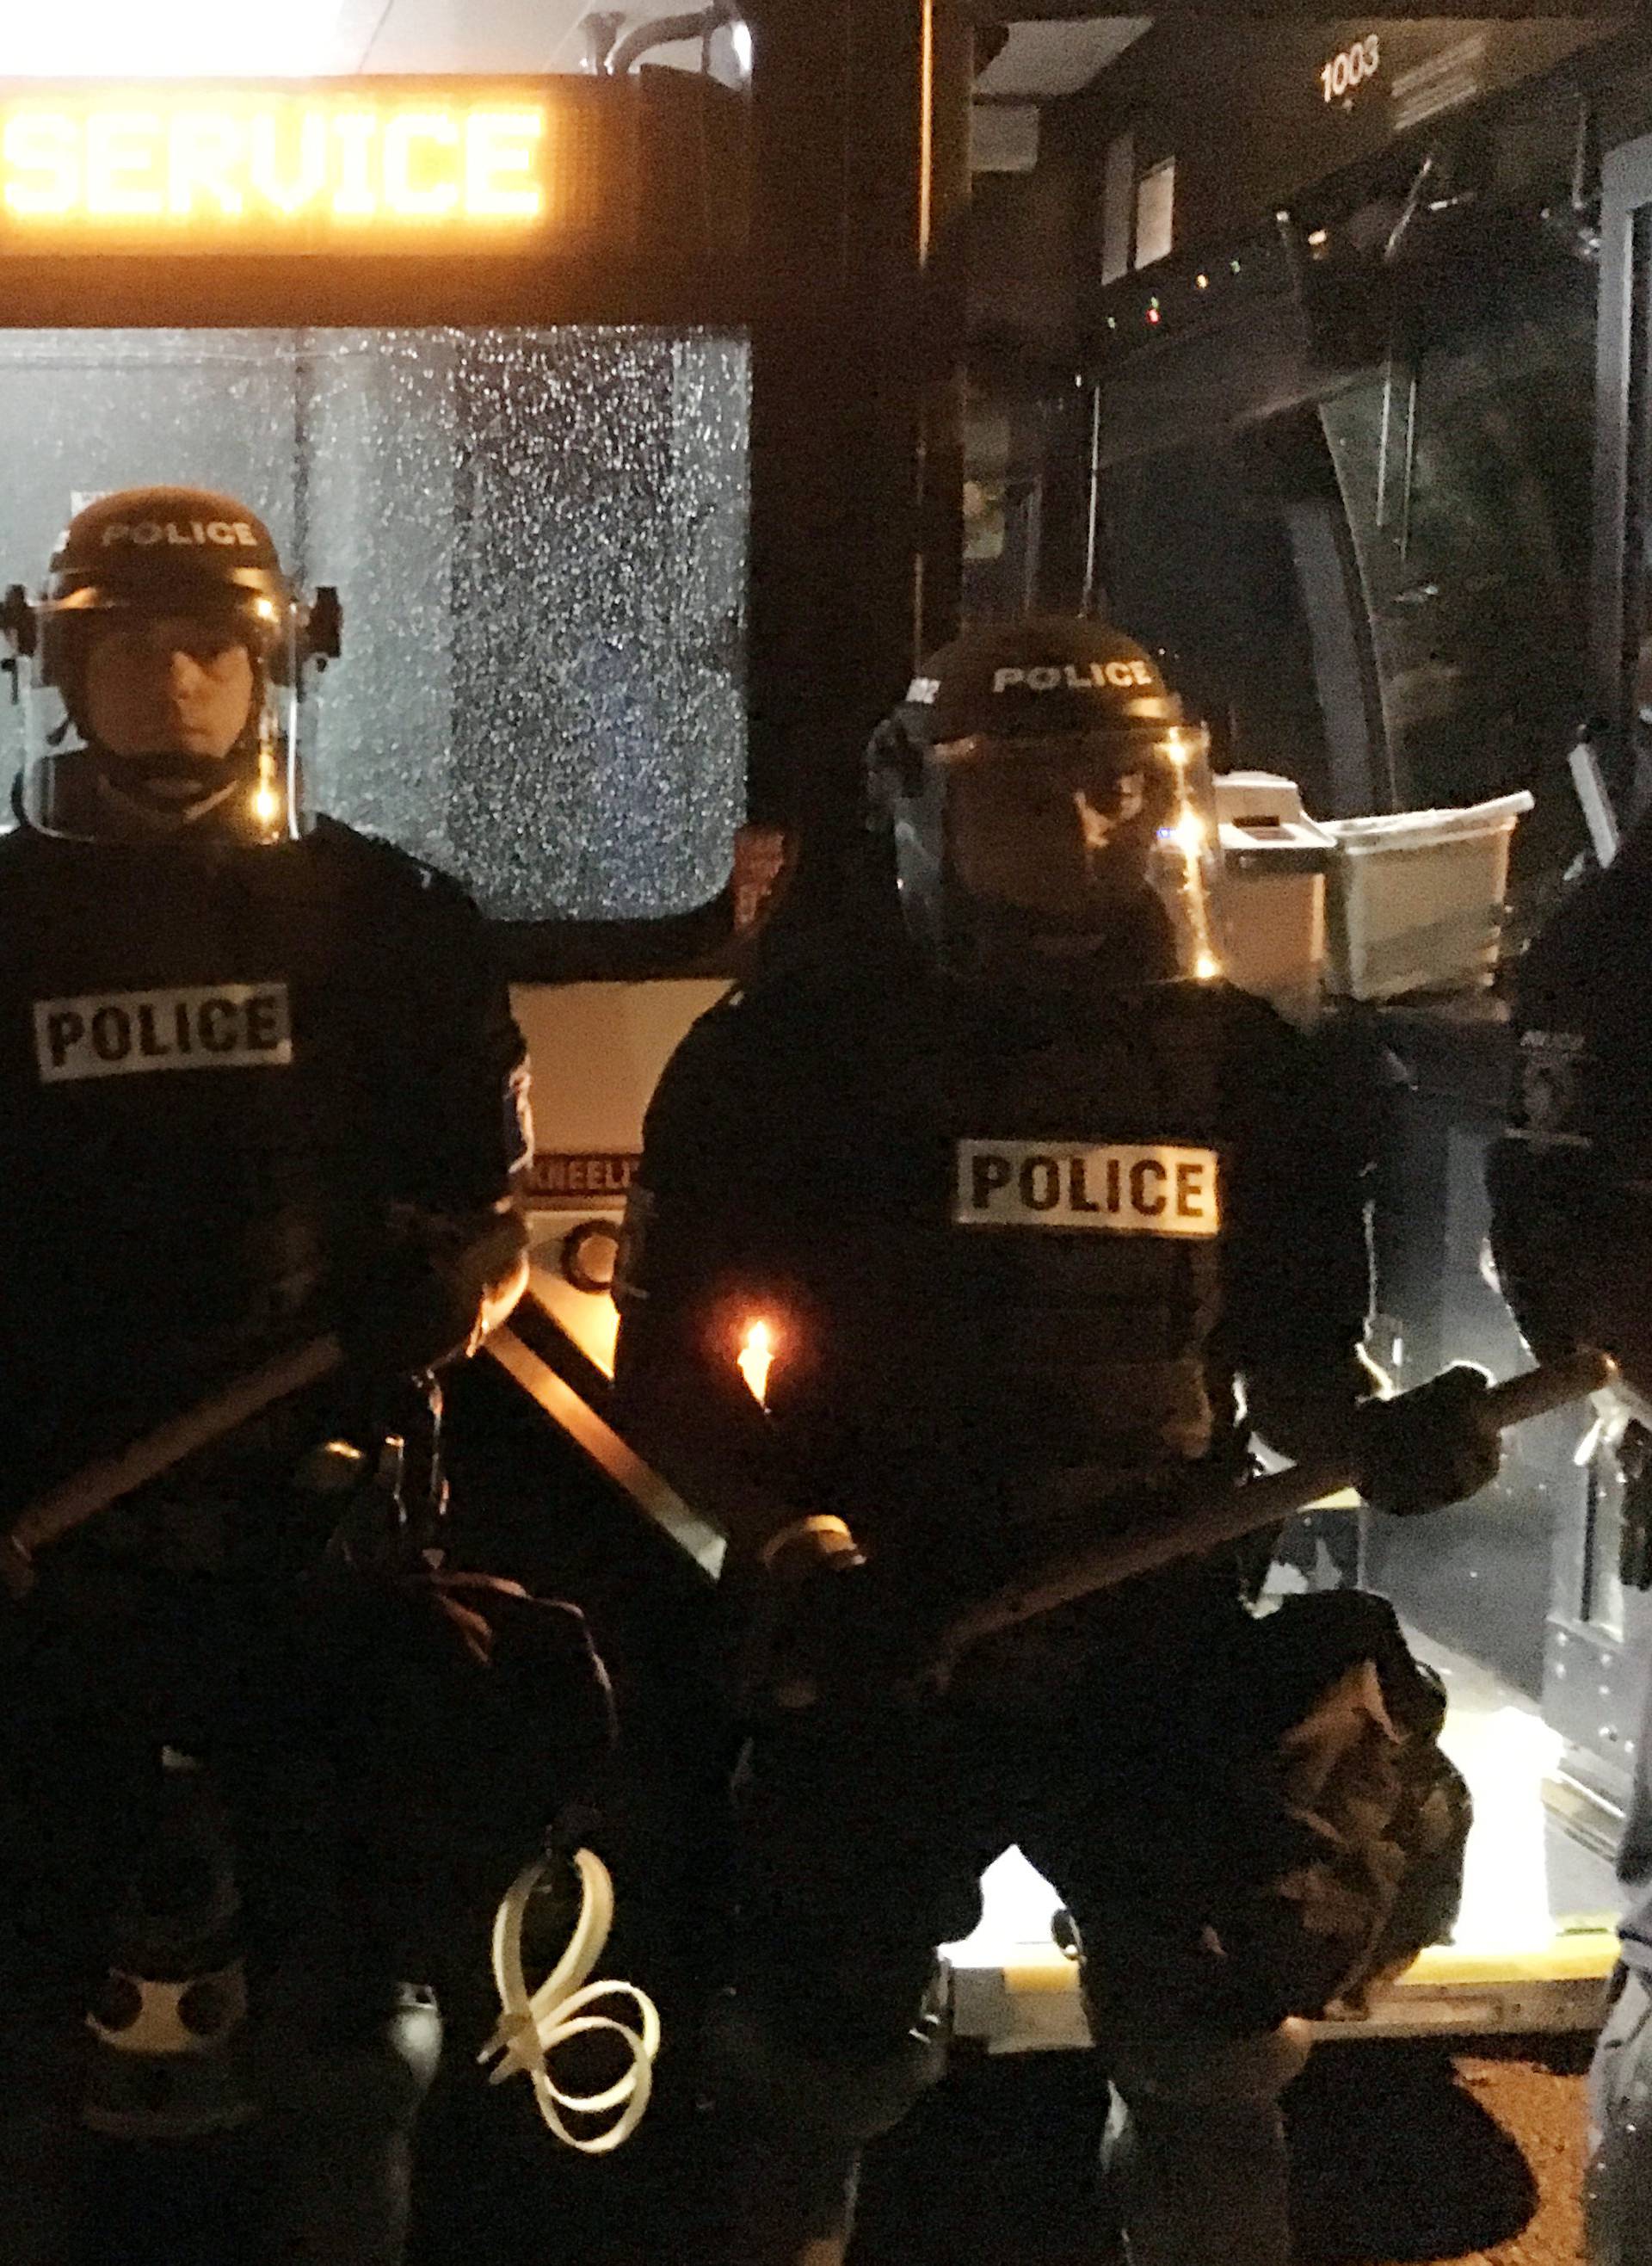 Police officers wearing riot gear block a road during protests after police fatally shot a man in the parking lot of an apartment complex in Charlotte